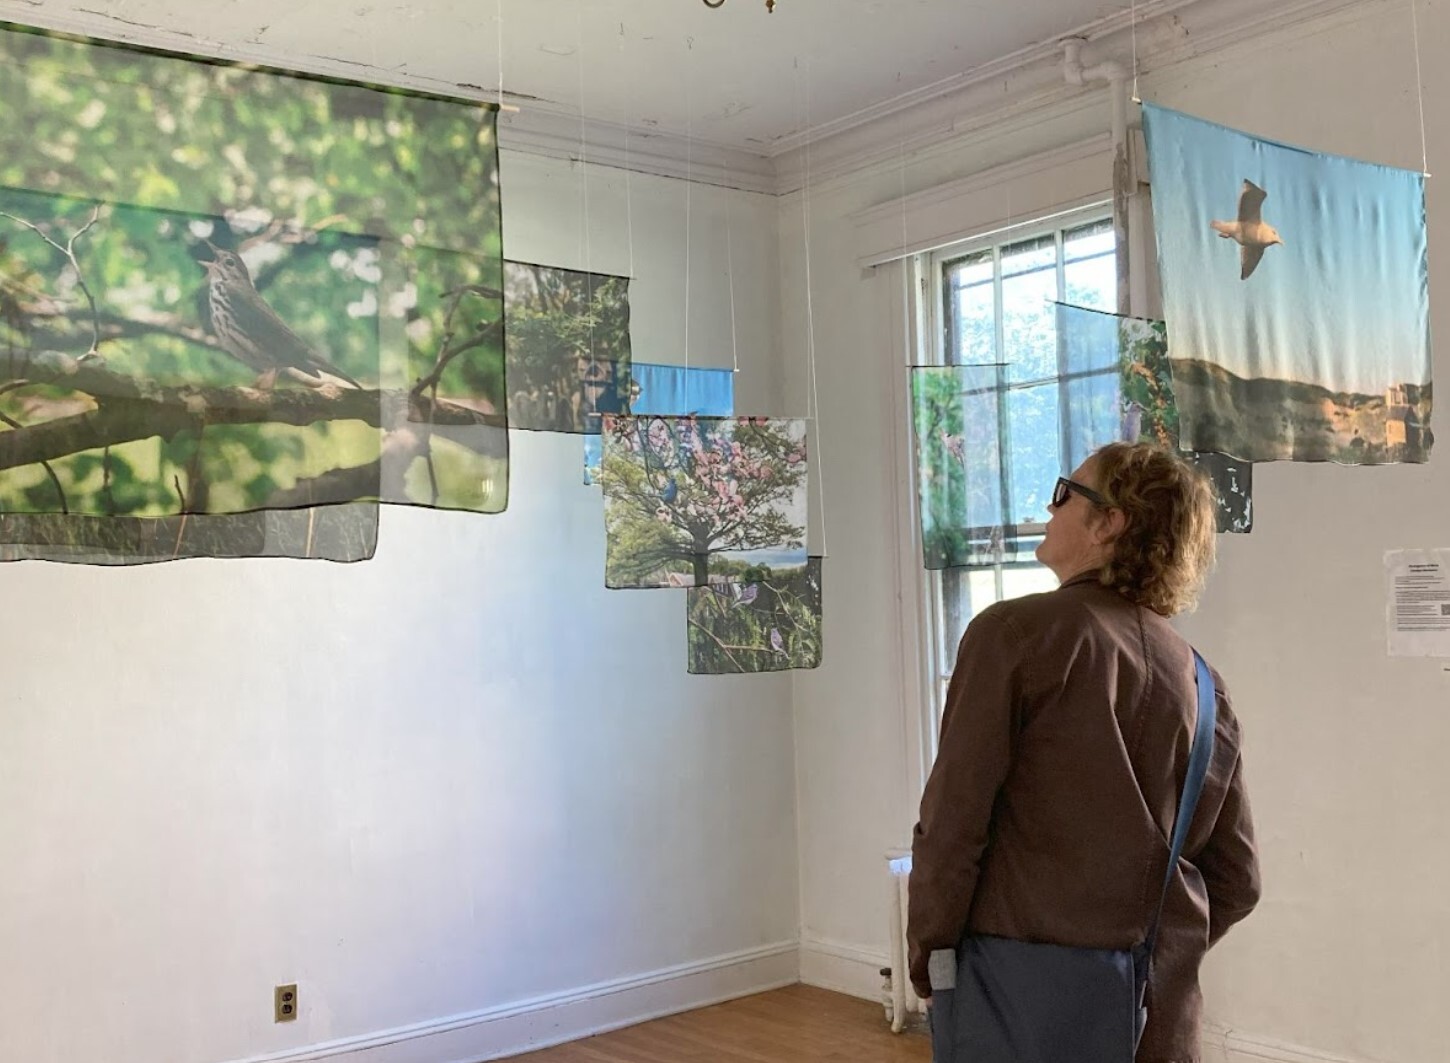 As part of the "Divergence of Birds" exhibit, Carolyn Monastra’s photographs hang on silk banners inside our Governors Island seasonal environmental center. Photo: NYC Audubon